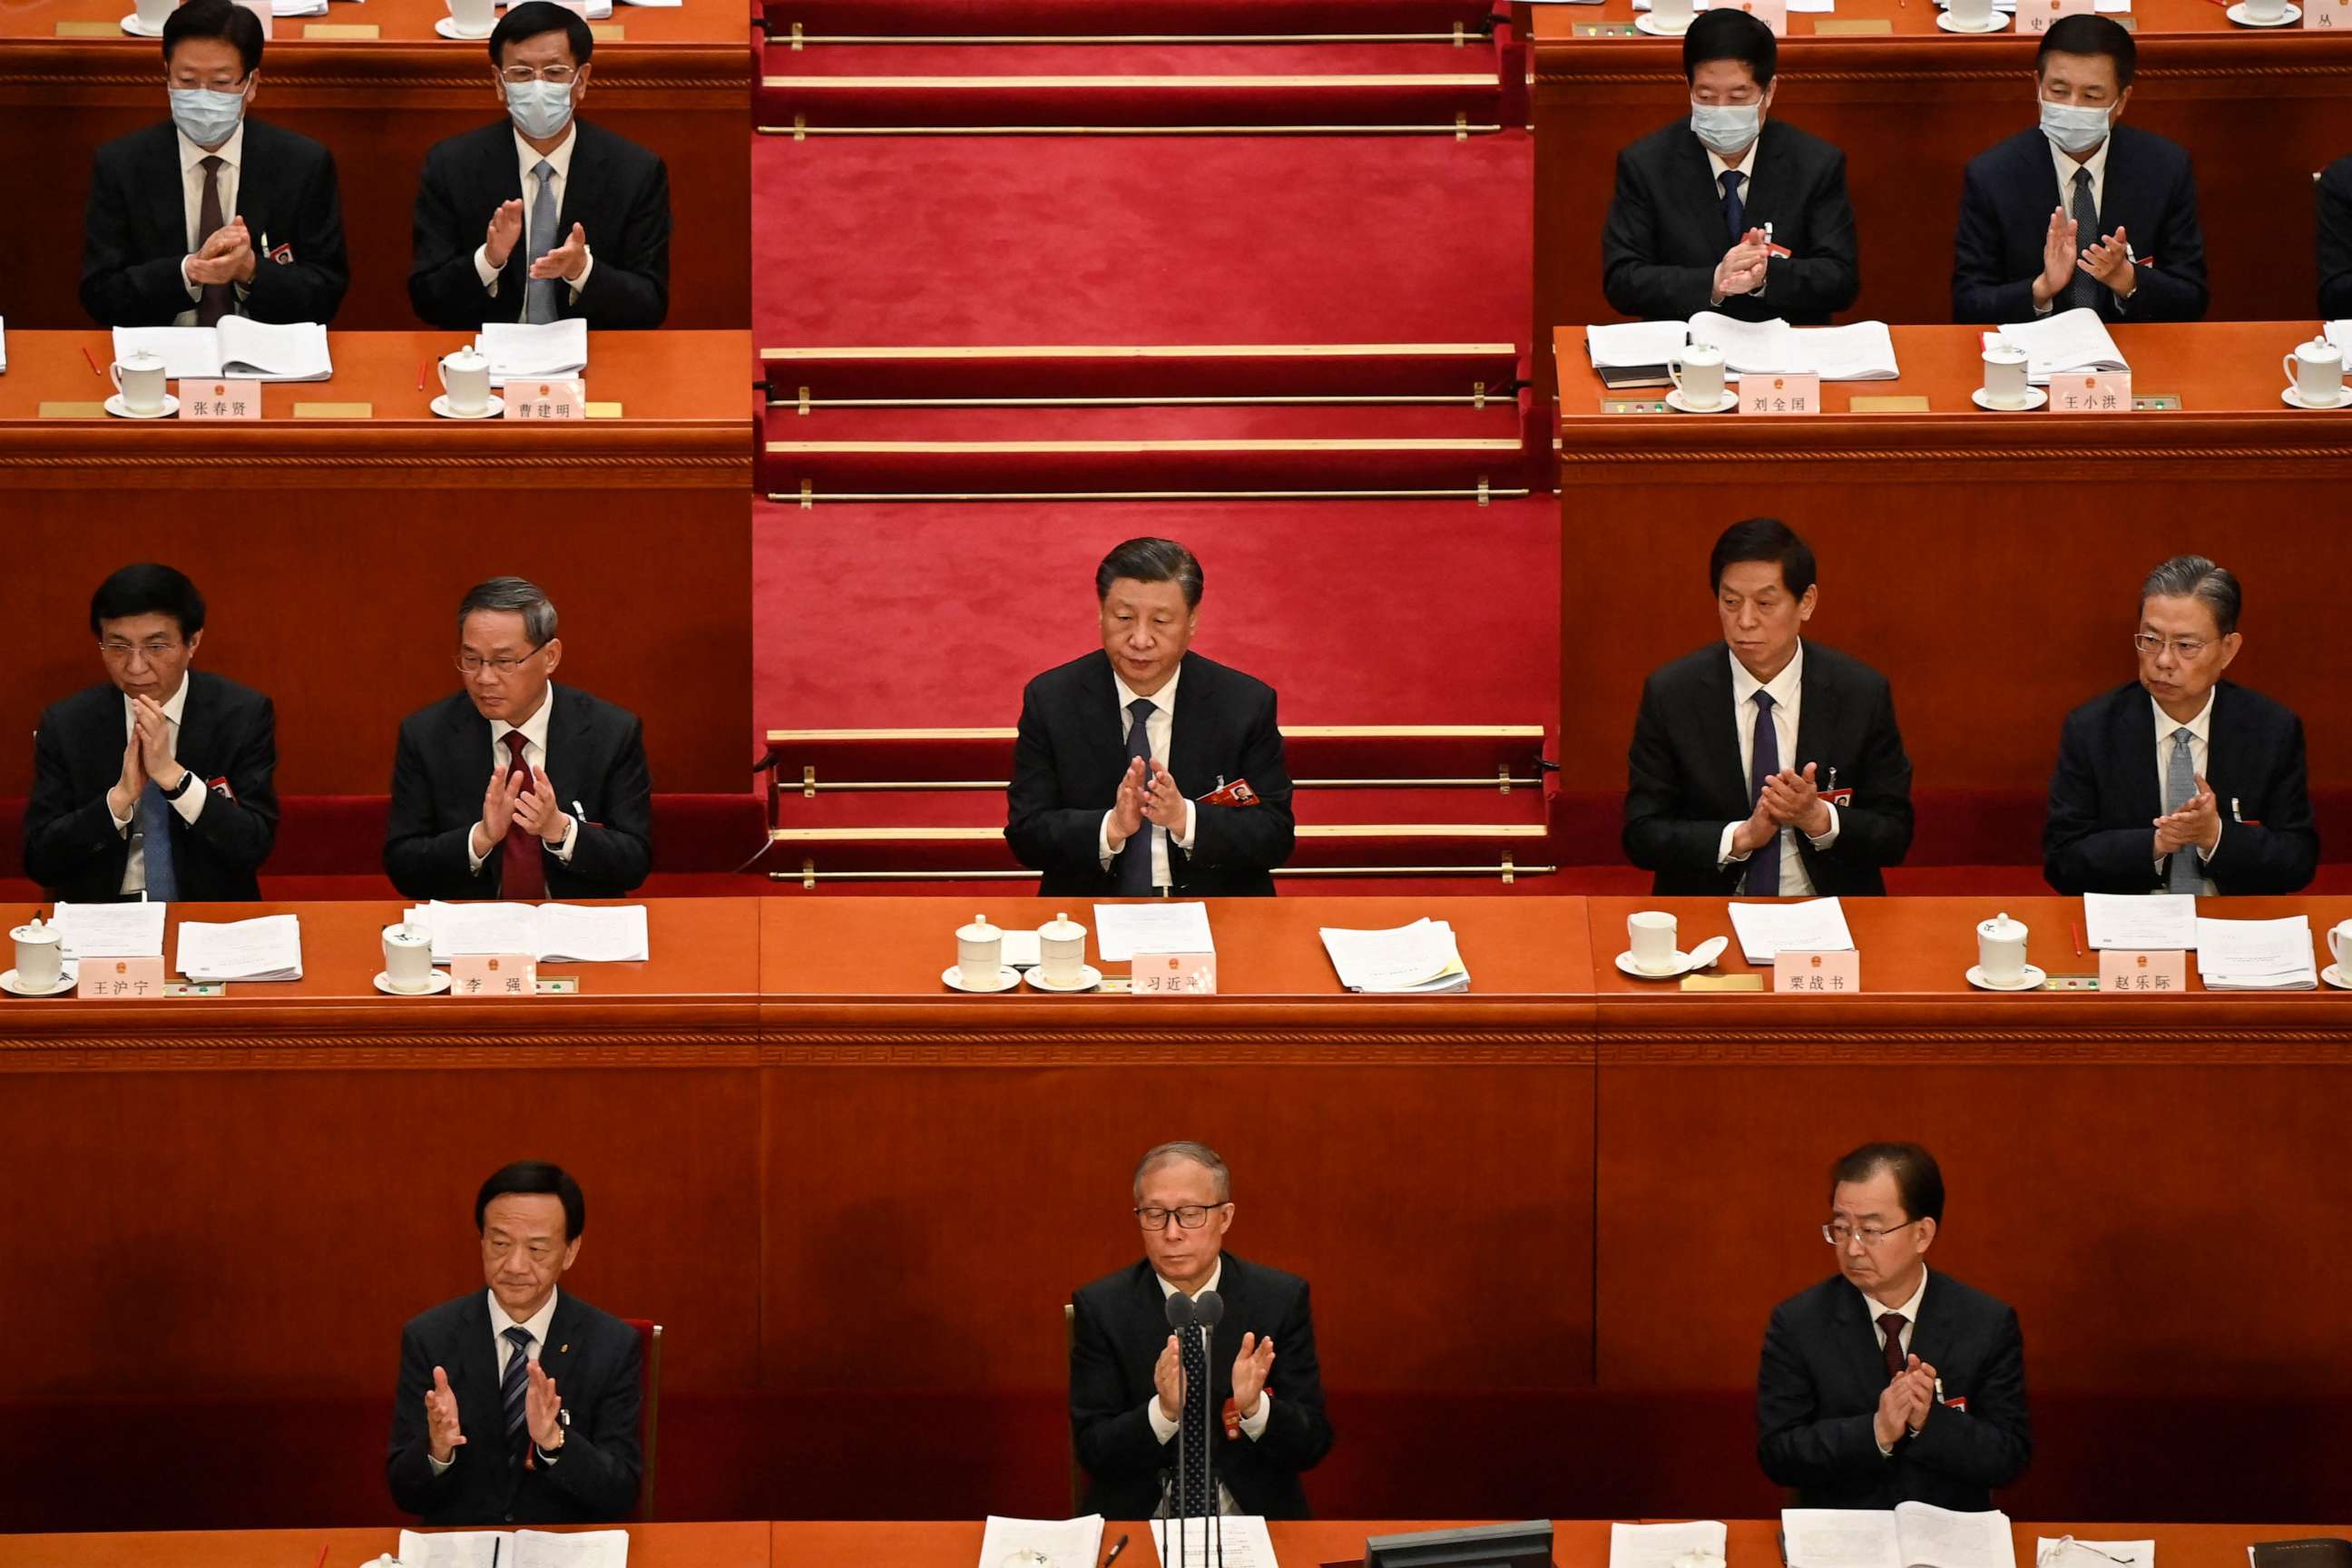 PHOTO: Politburo Standing Committee members, including President Xi Jinping, applaud during the second plenary session of the National People's Congress at the Great Hall of the People in Beijing on March 7, 2023.